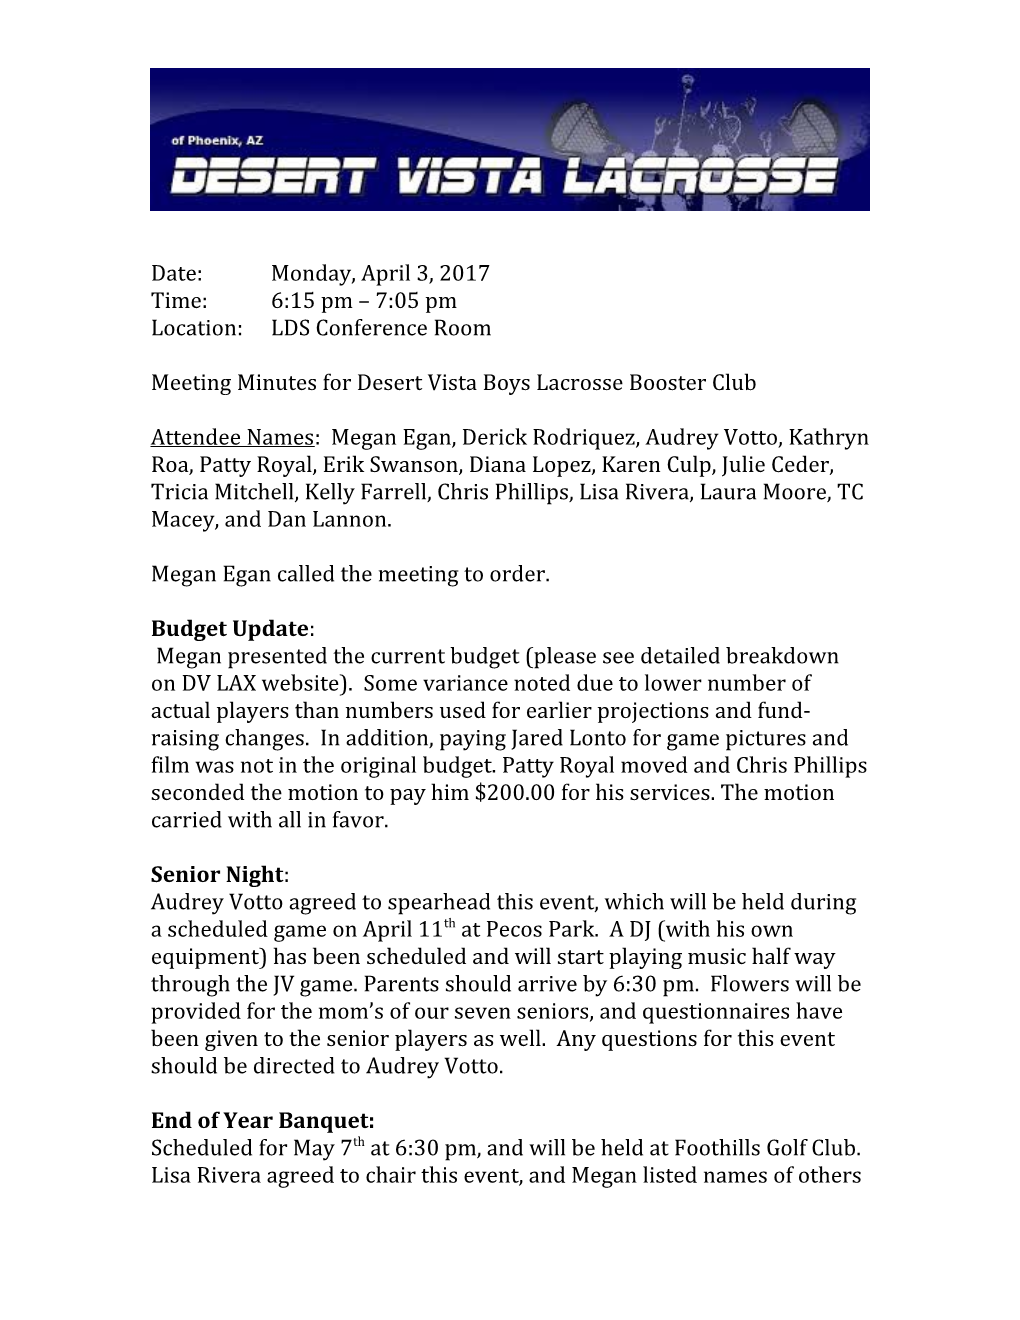 Meeting Minutes for Desert Vista Boys Lacrosse Booster Club